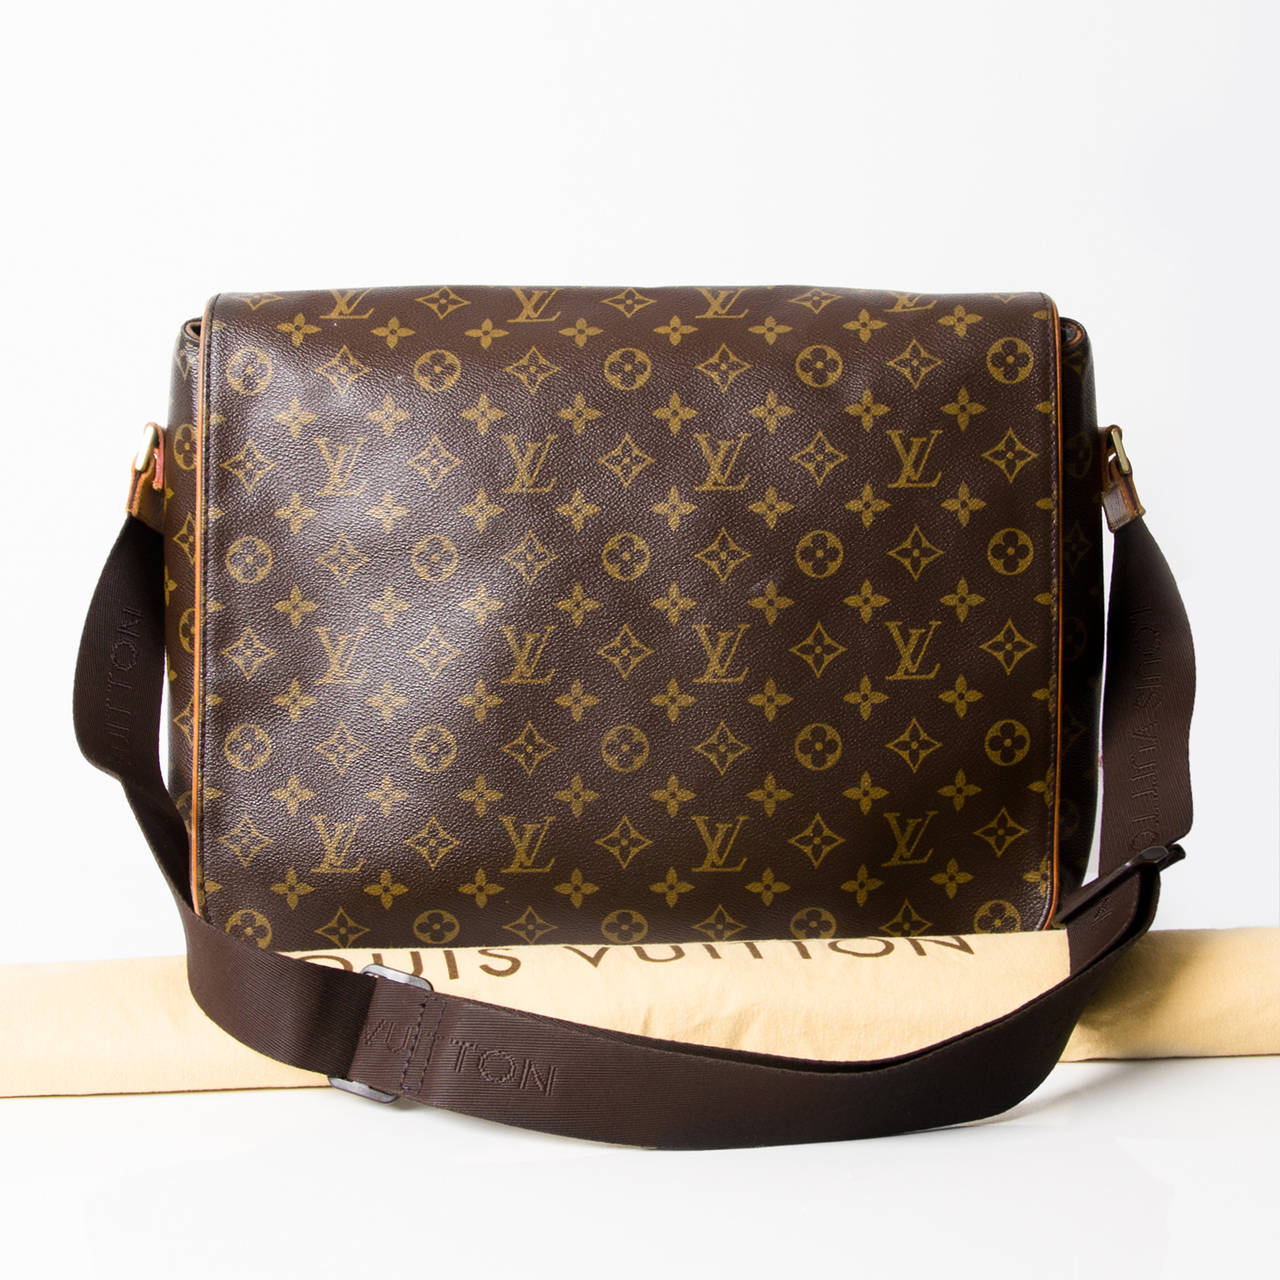 Unisex, practical and effortlessly stylish, the Valmy MM messenger bag is tribute to Louis Vuitton‘s rich heritage. Timeless Monogram canvas and an A4-sized interior complete this sophisticated messenger bag.
- Adjustable shoulder strap
- Magnetic